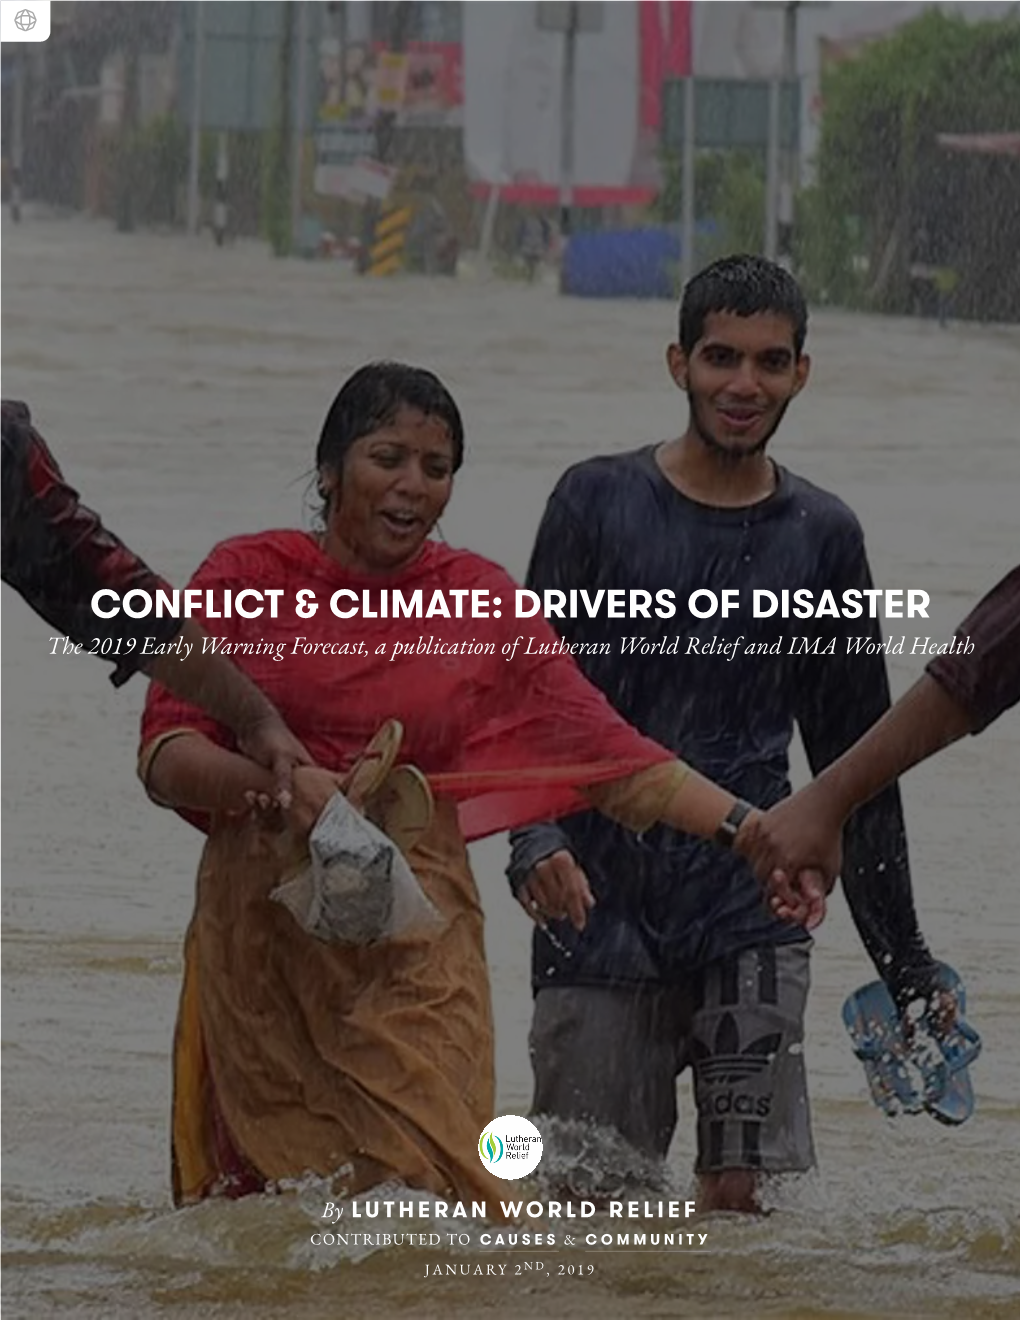 Conflict & Climate: Drivers of Disaster